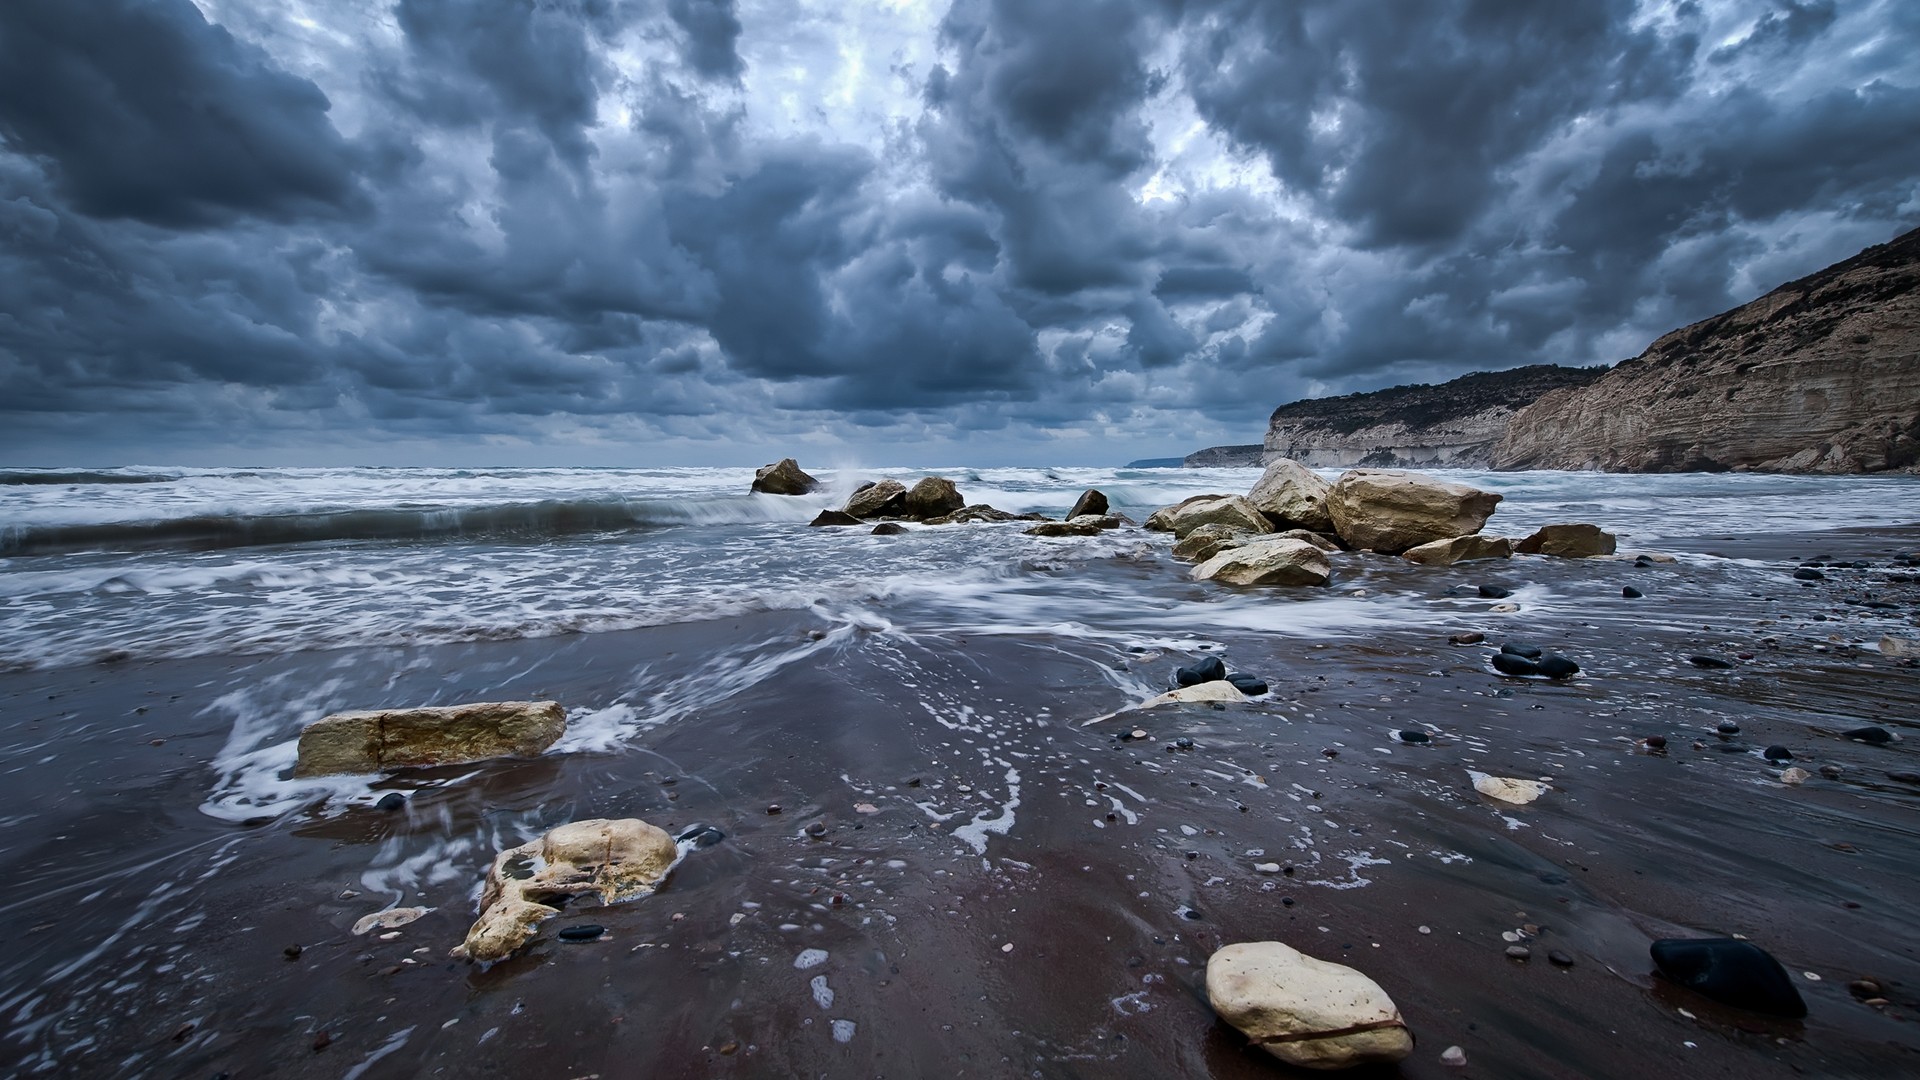 General 1920x1080 landscape water clouds nature beach coast sky cliff rocks stones outdoors